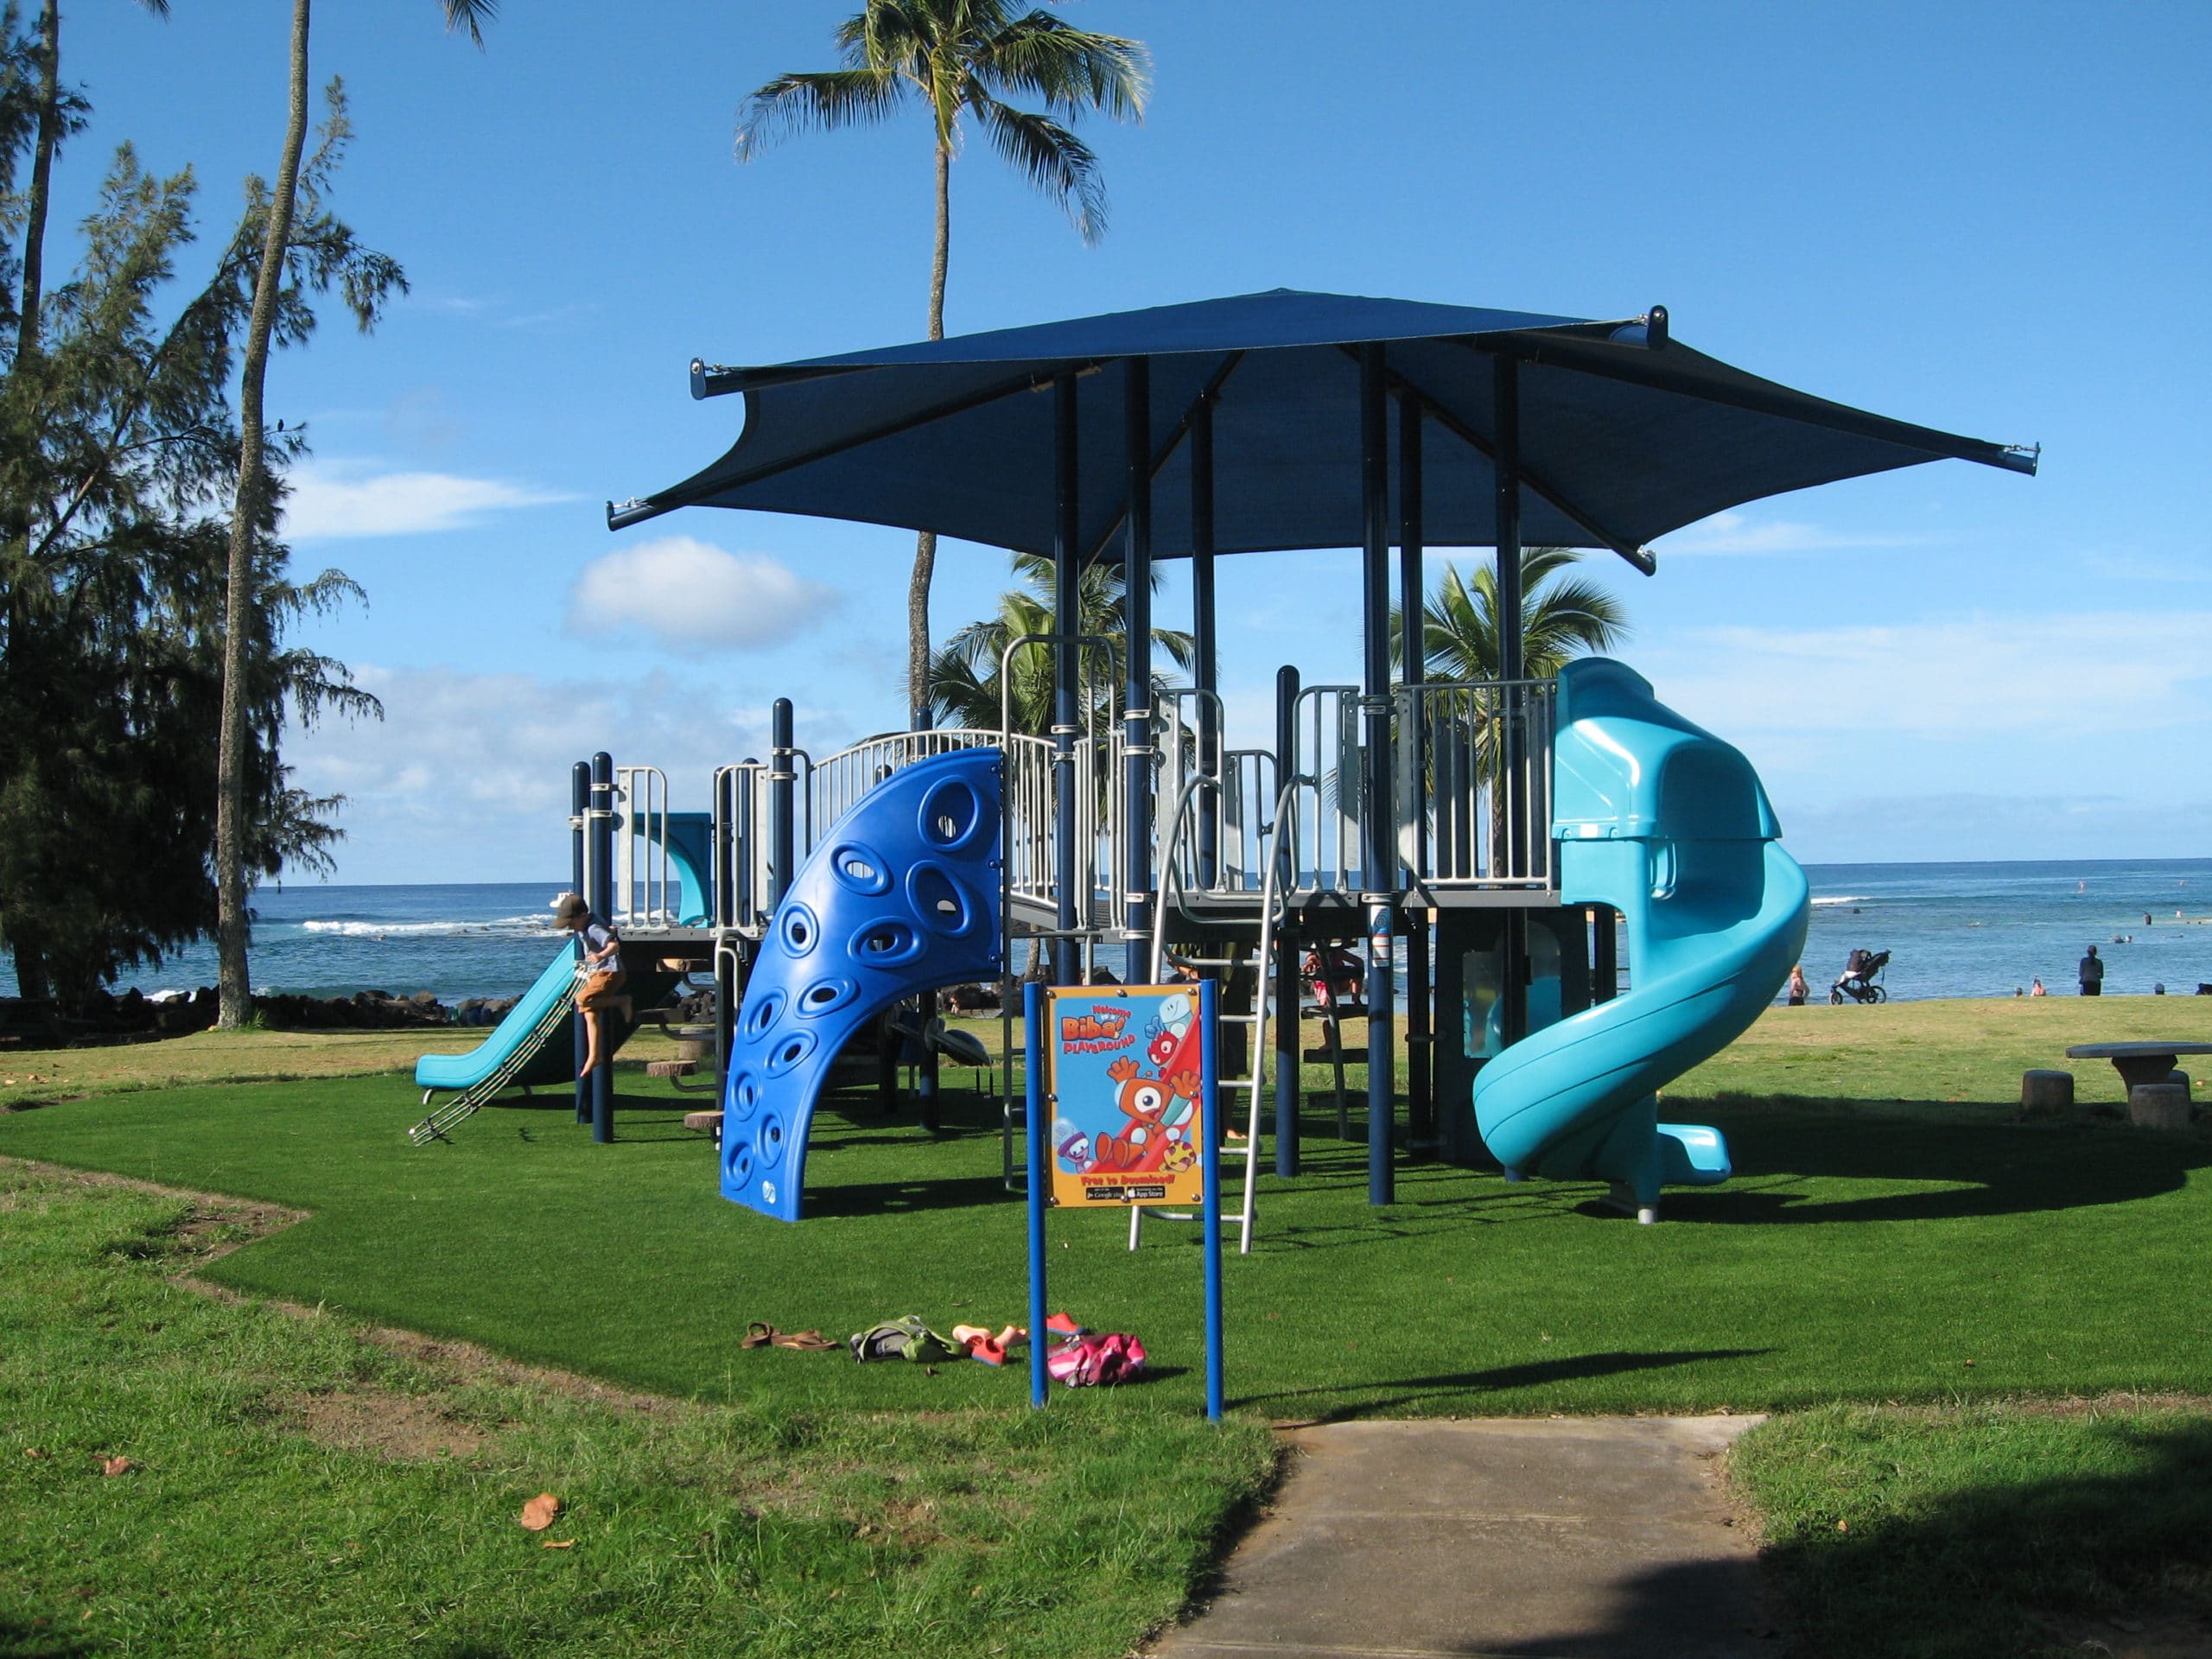 Pacific Recreation Project - Shade and Playground